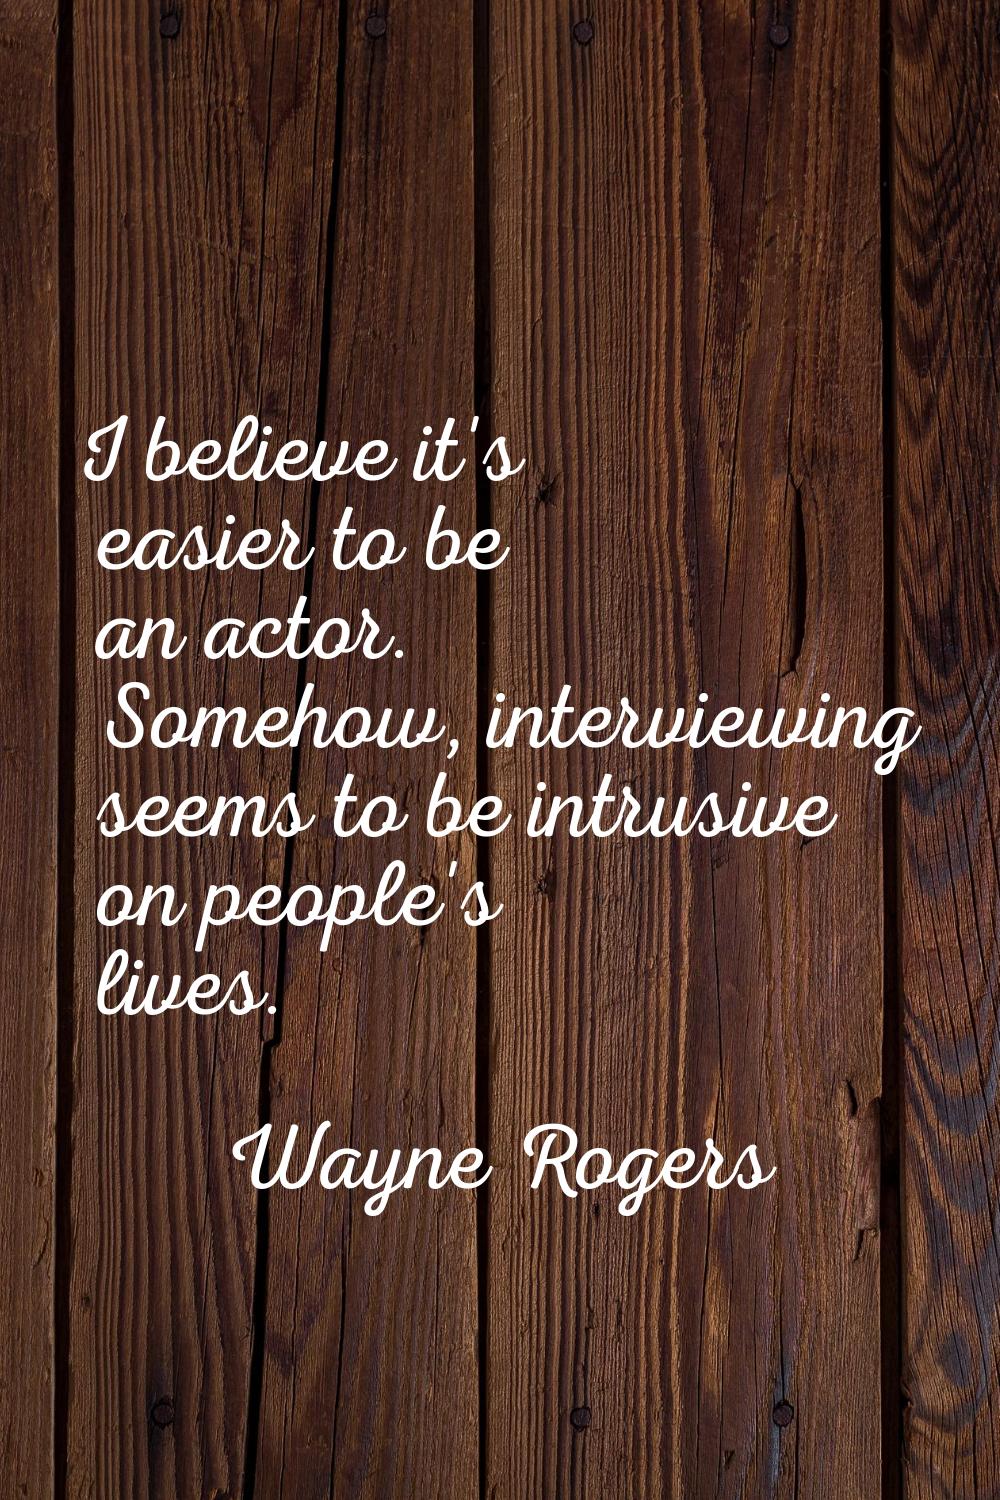 I believe it's easier to be an actor. Somehow, interviewing seems to be intrusive on people's lives